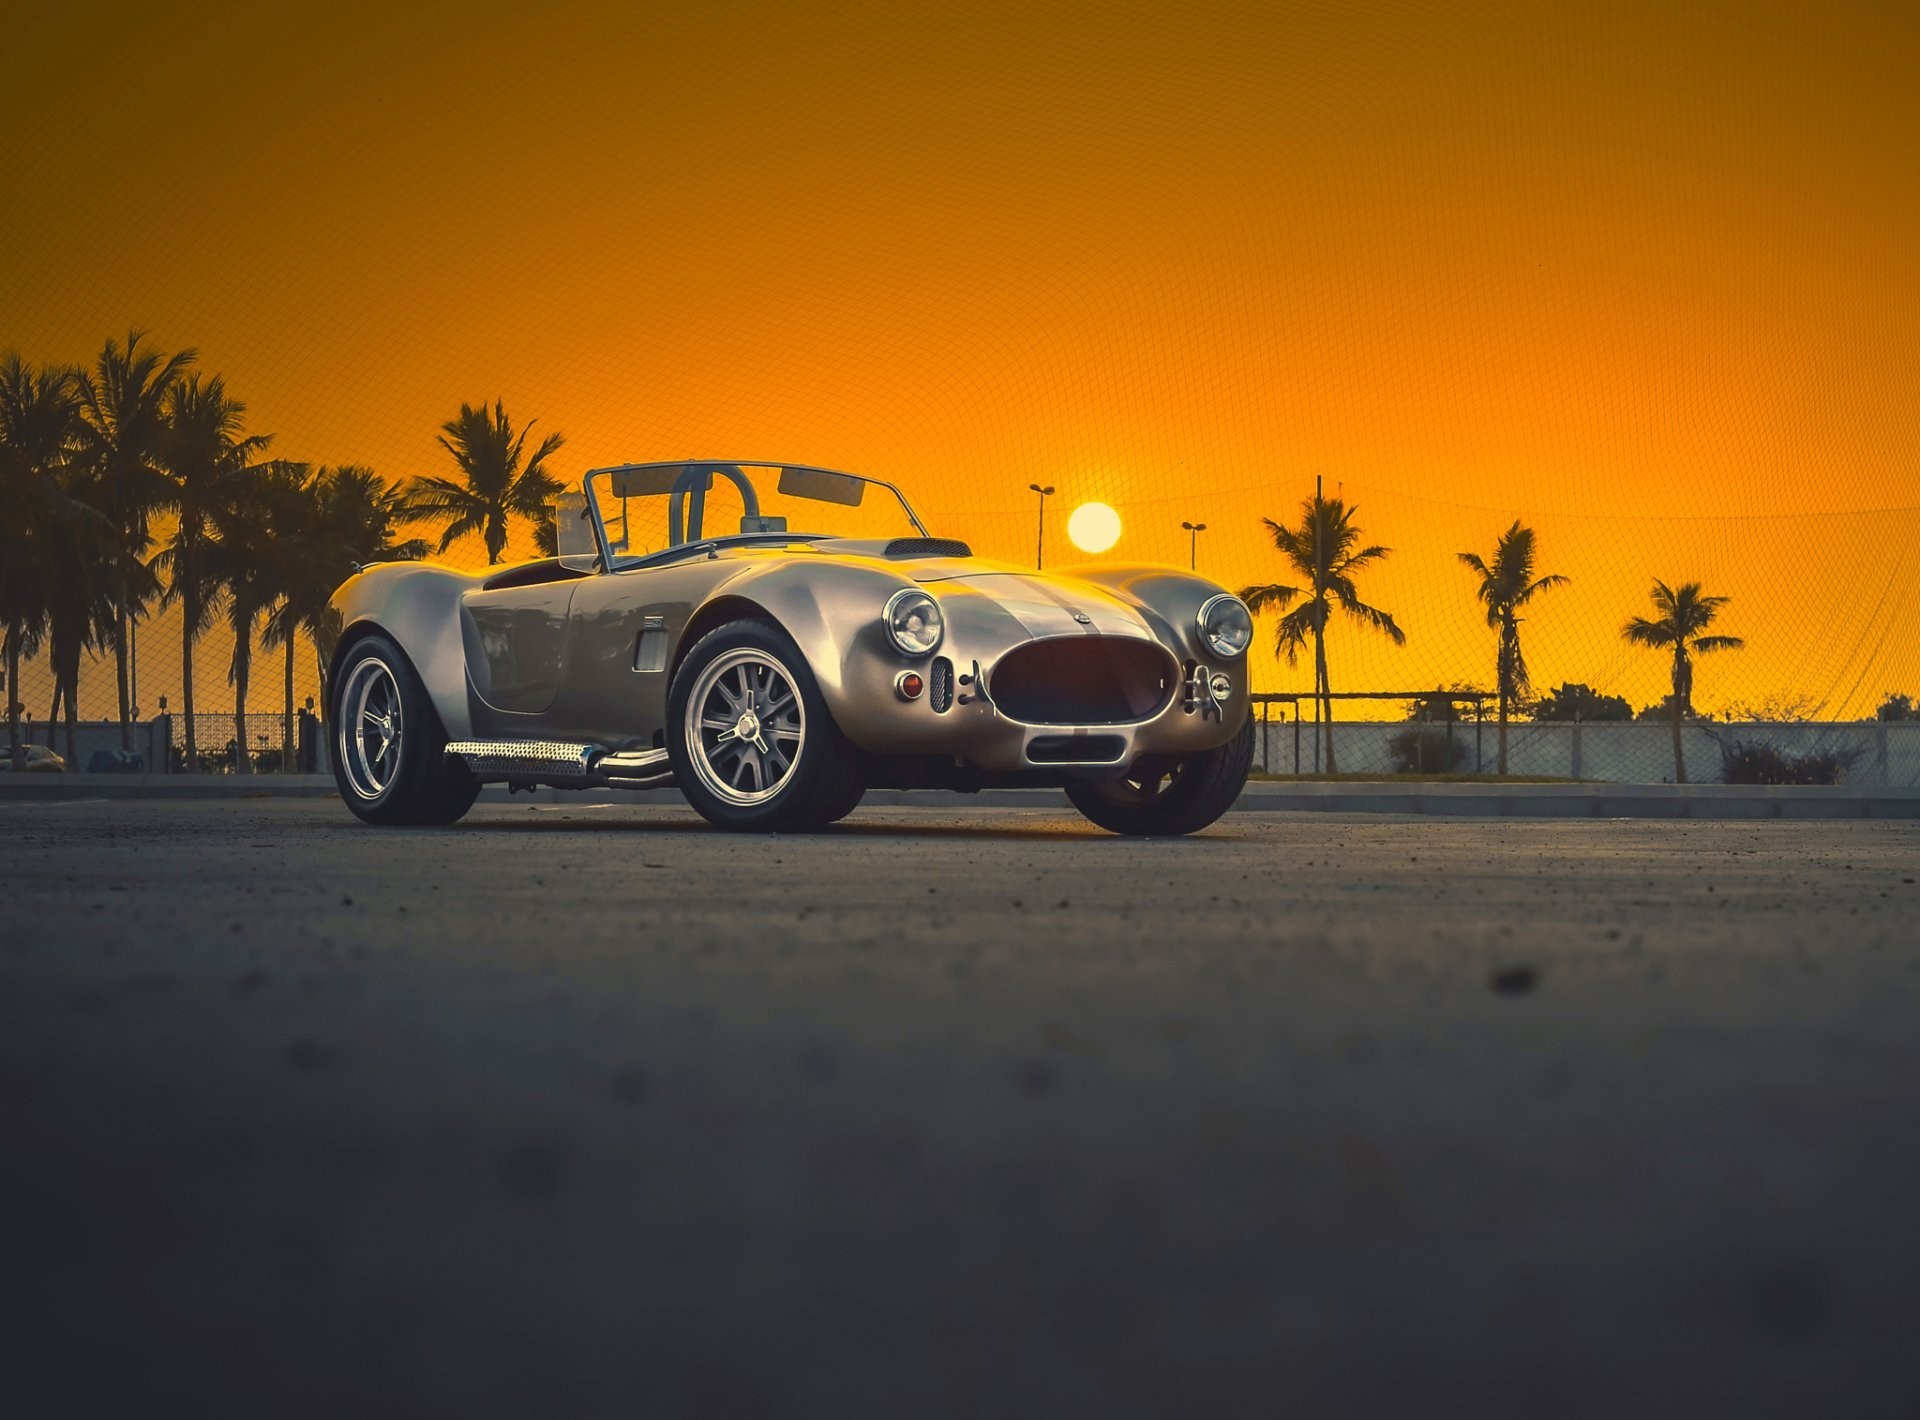 1920x1420 shelby ac cobra amazing classic car old sunset front